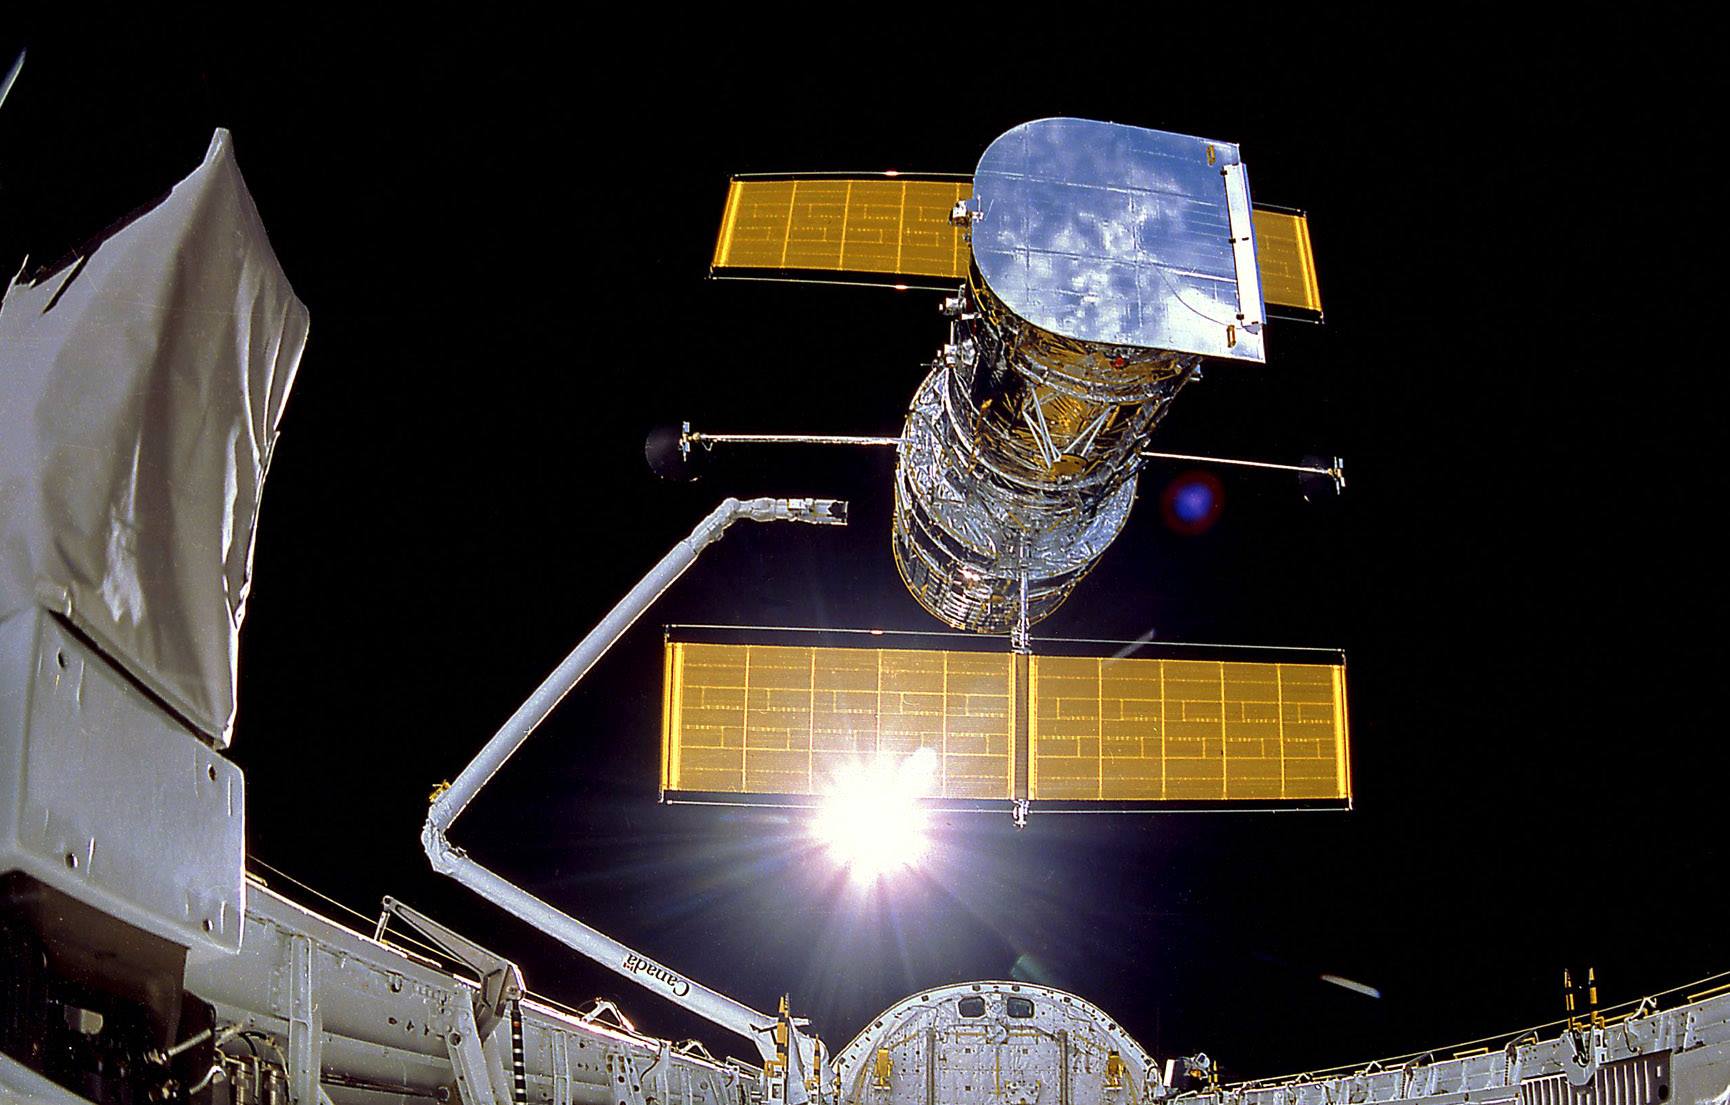 The moment of deployment of the Hubble Space Telescope (HST), as seen from the IMAX Cargo Bay Camera (ICBC). Photo Credit: NASA